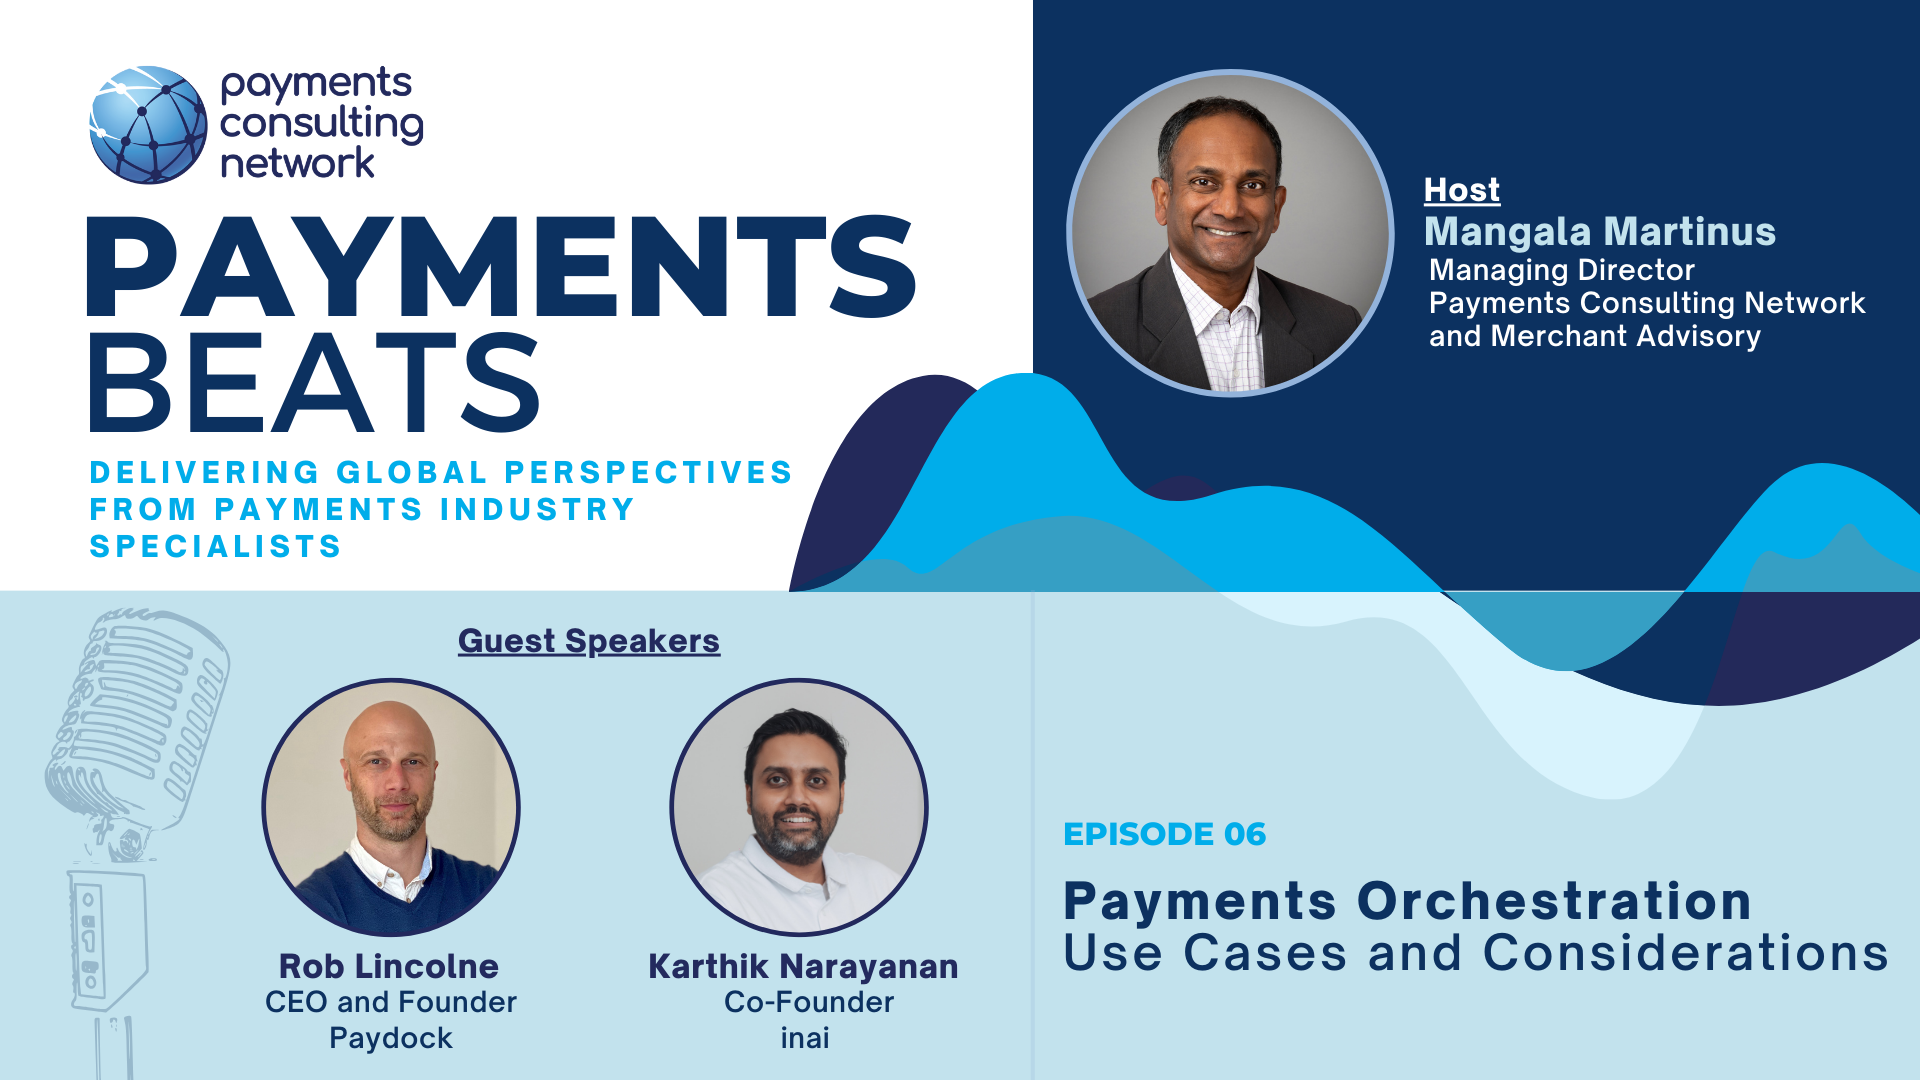 Payments Orchestration